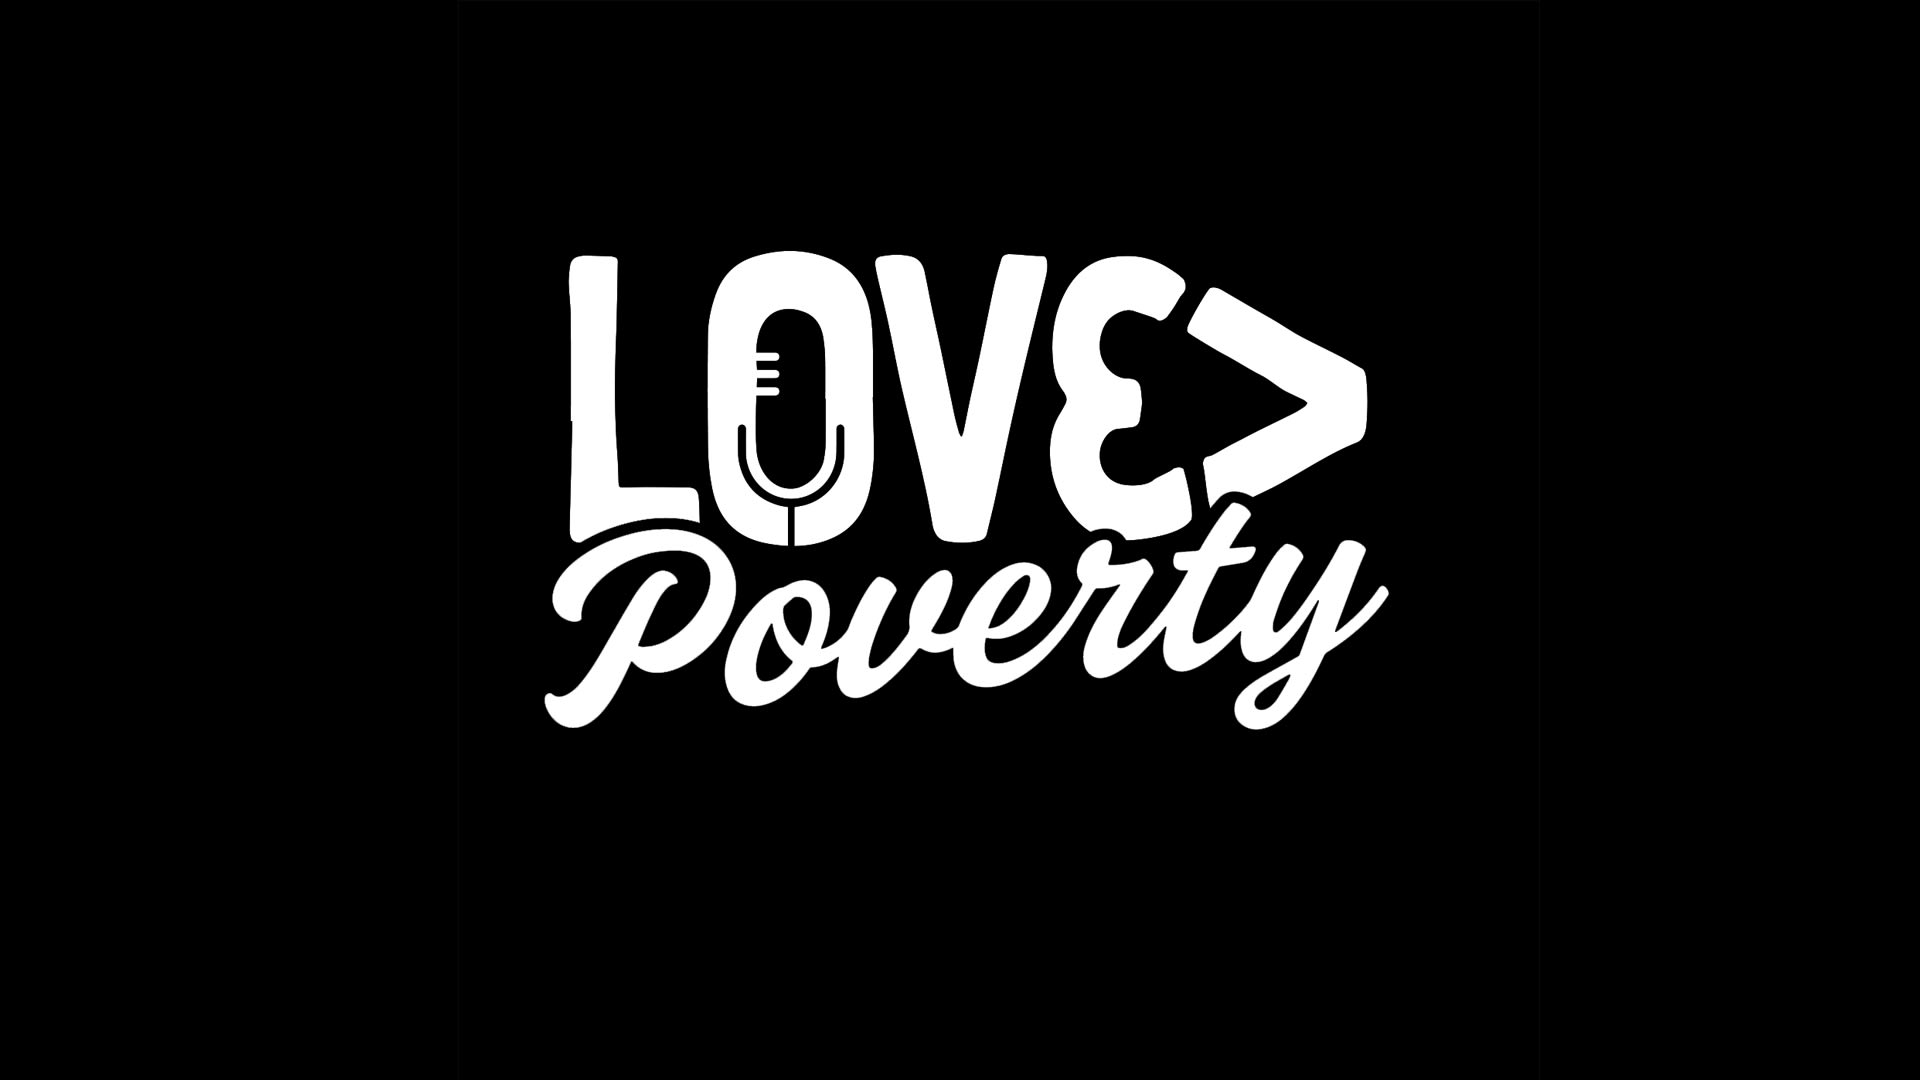 A black background with the logo "Love is great than poverty"